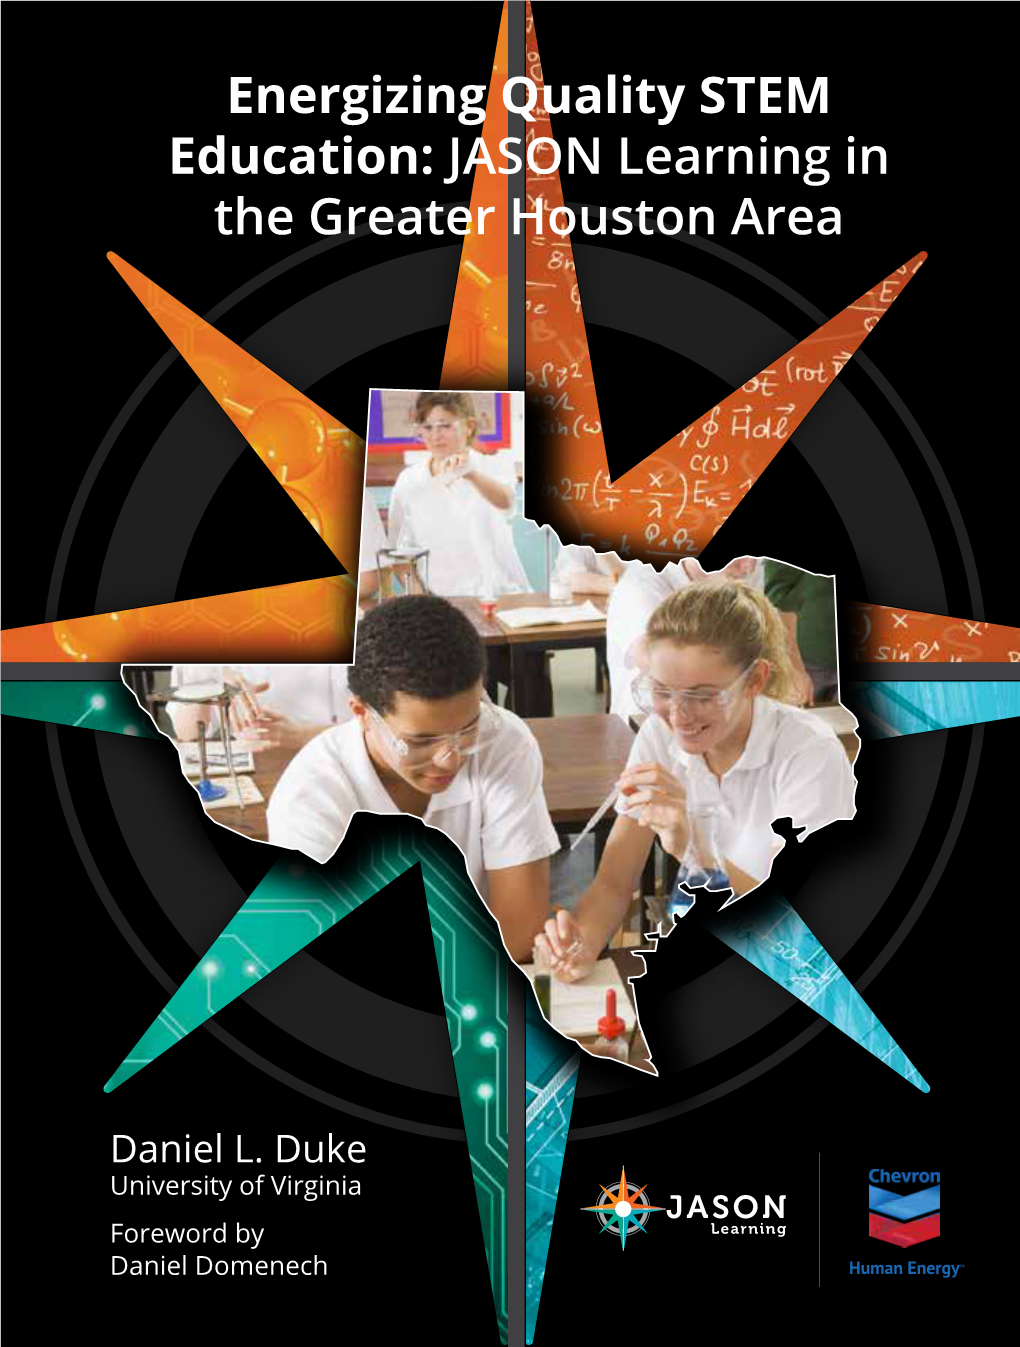 Energizing Quality STEM Education: JASON Learning in the Greater Houston Area